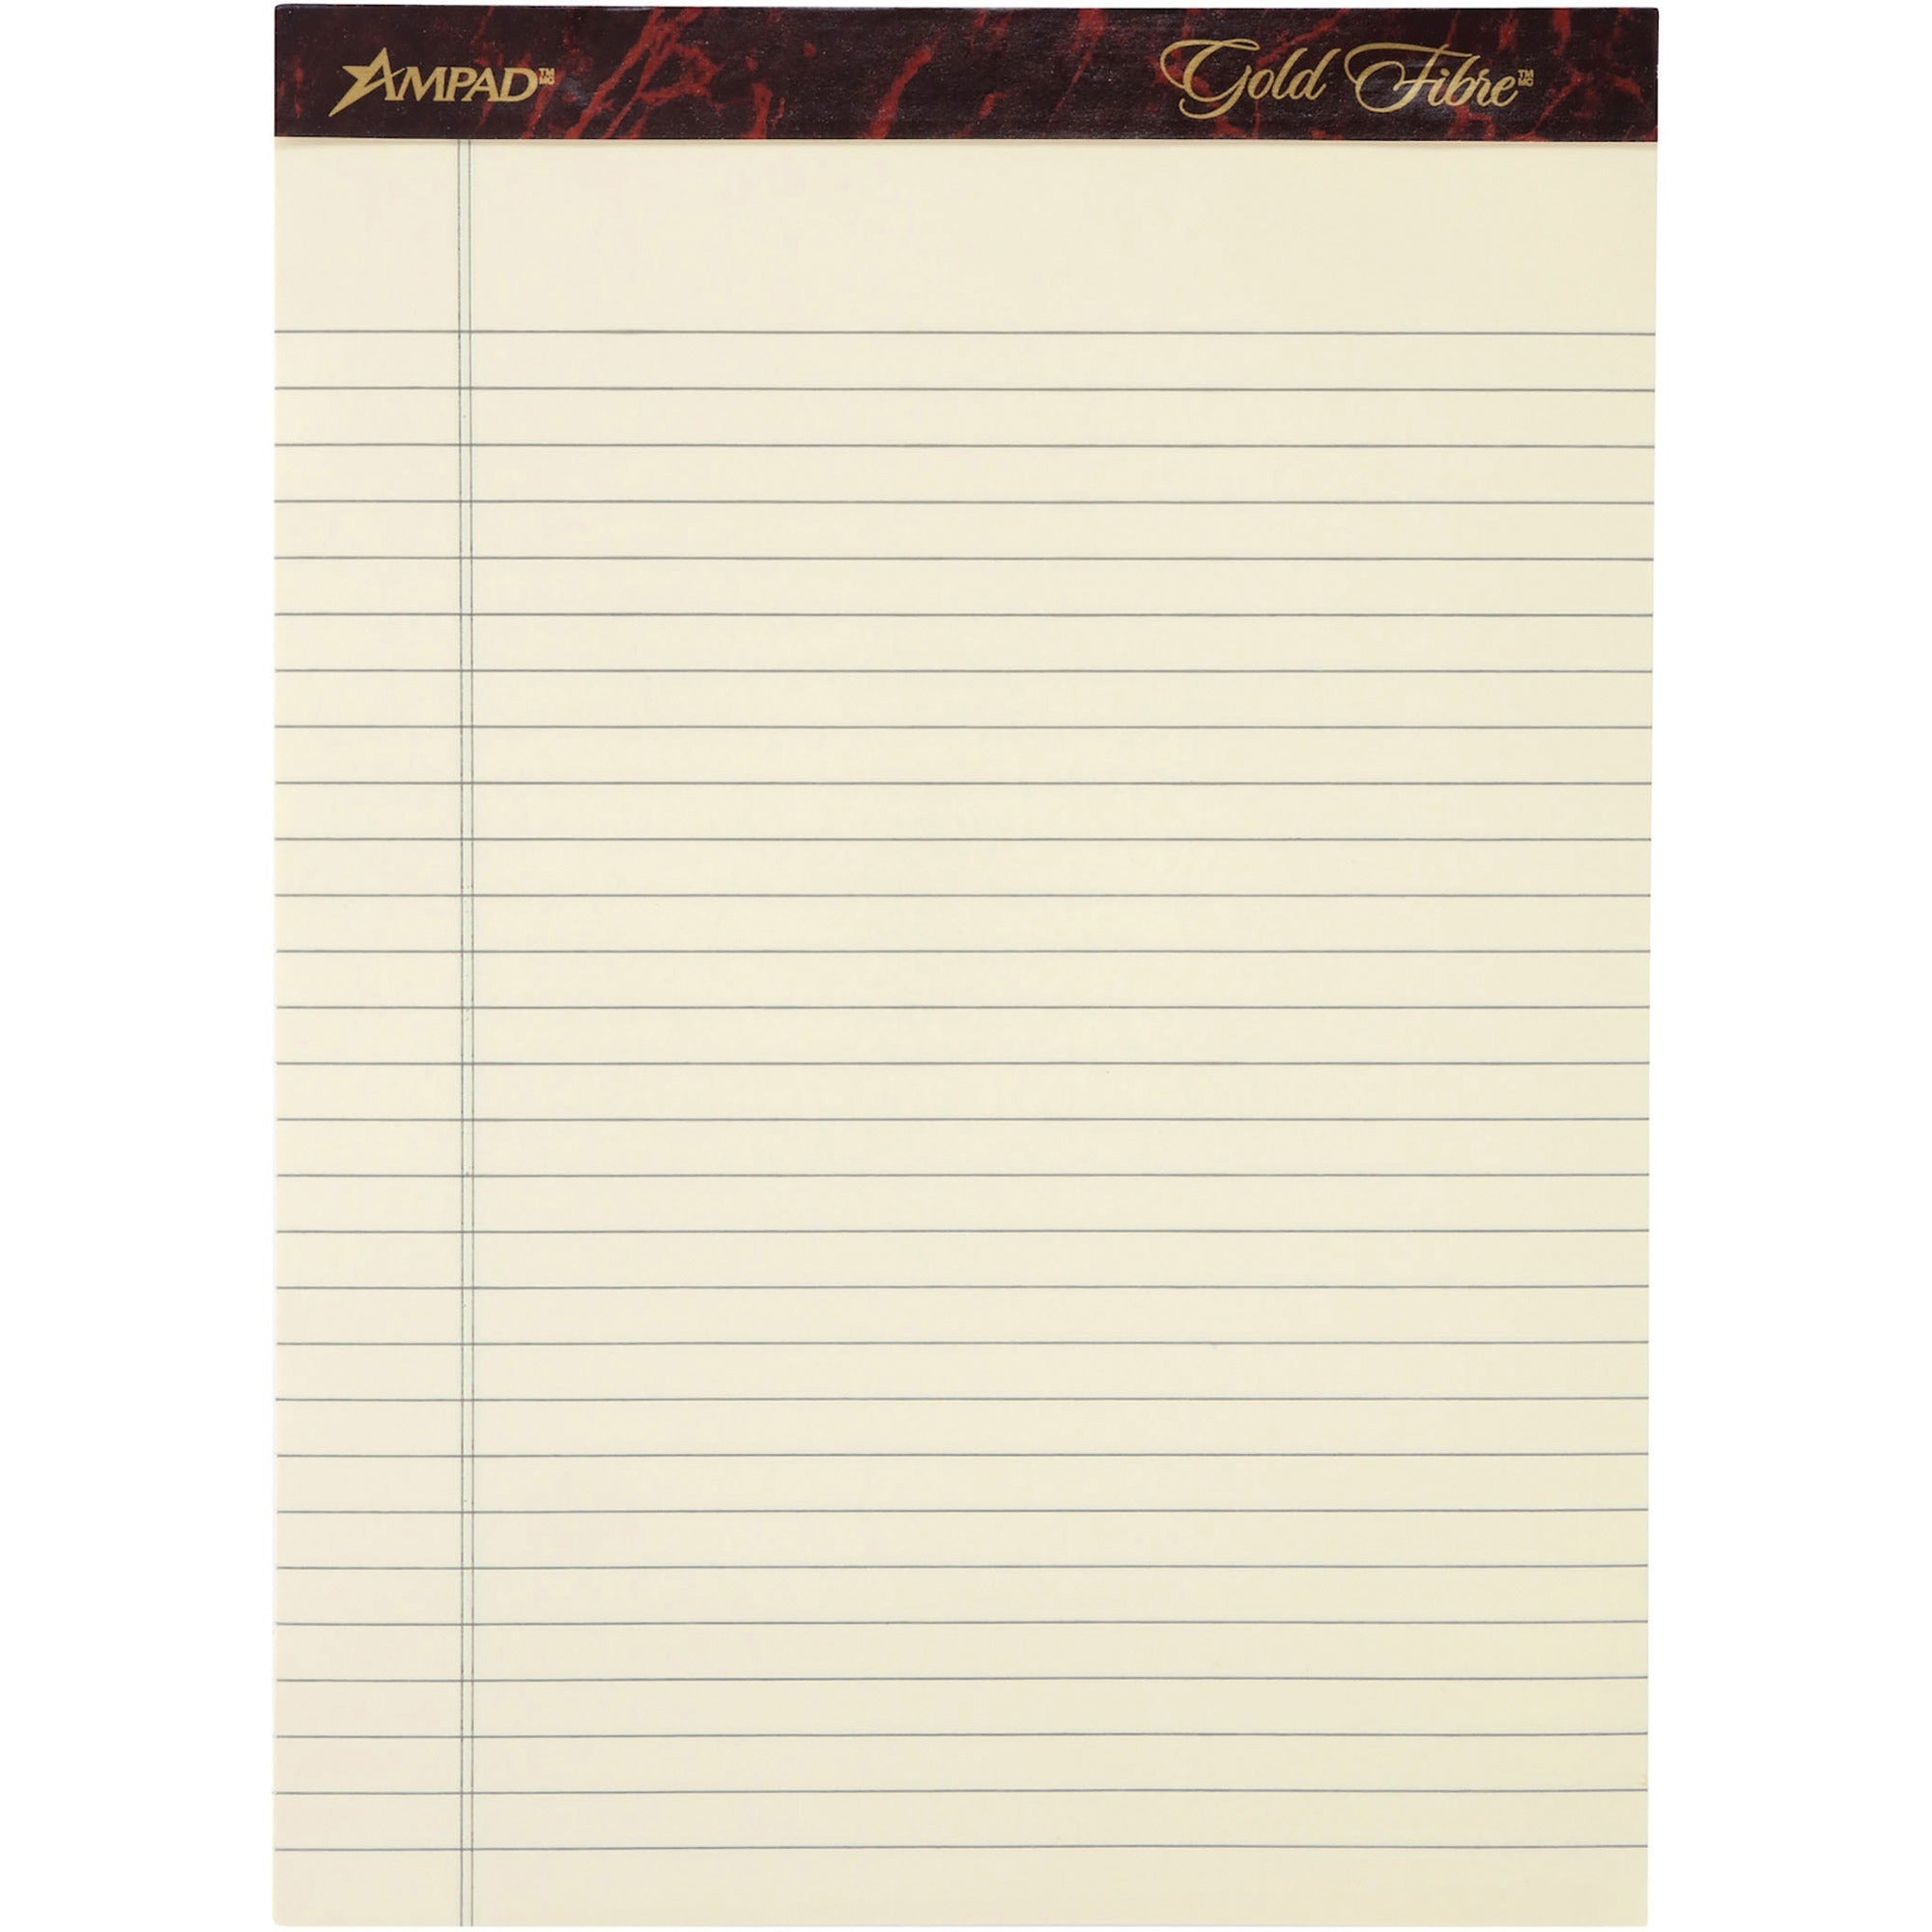 Ampad Gold Fibre Legal Rule Retro Writing Pads - 50 Sheets - Wire Bound - 0.34" Ruled - 20 lb Basis Weight - 8 1/2" x 11 3/4" - Ivory Paper - Micro Perforated, Easy Tear, Chipboard Backing, Heavyweight - 4 / Pack - 